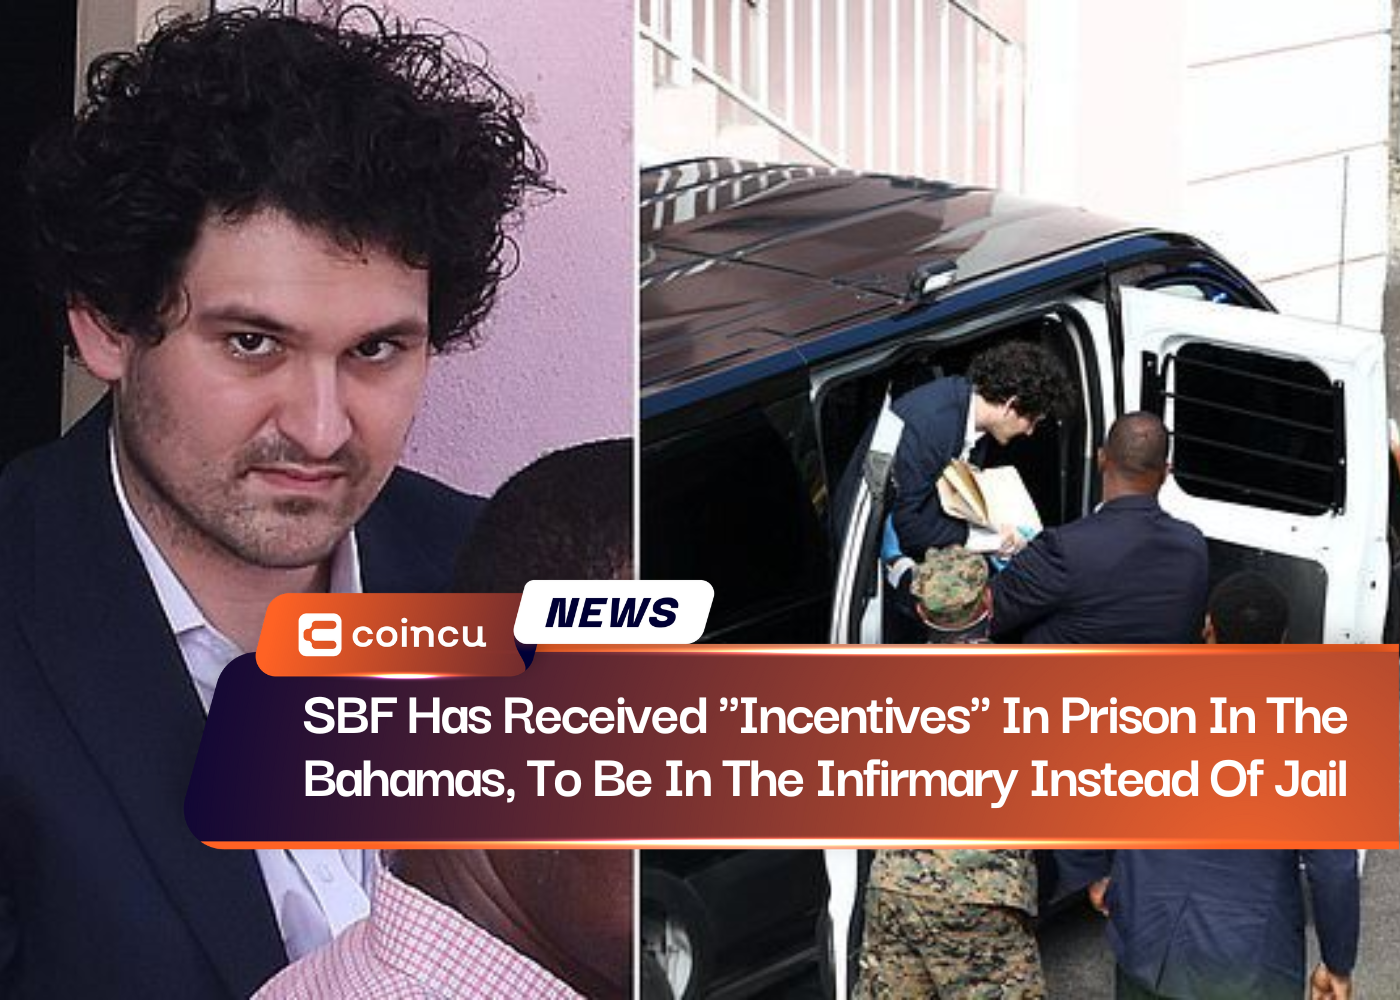 SBF Has Received "Incentives" In Prison In The Bahamas, To Be In The Infirmary Instead Of Jail